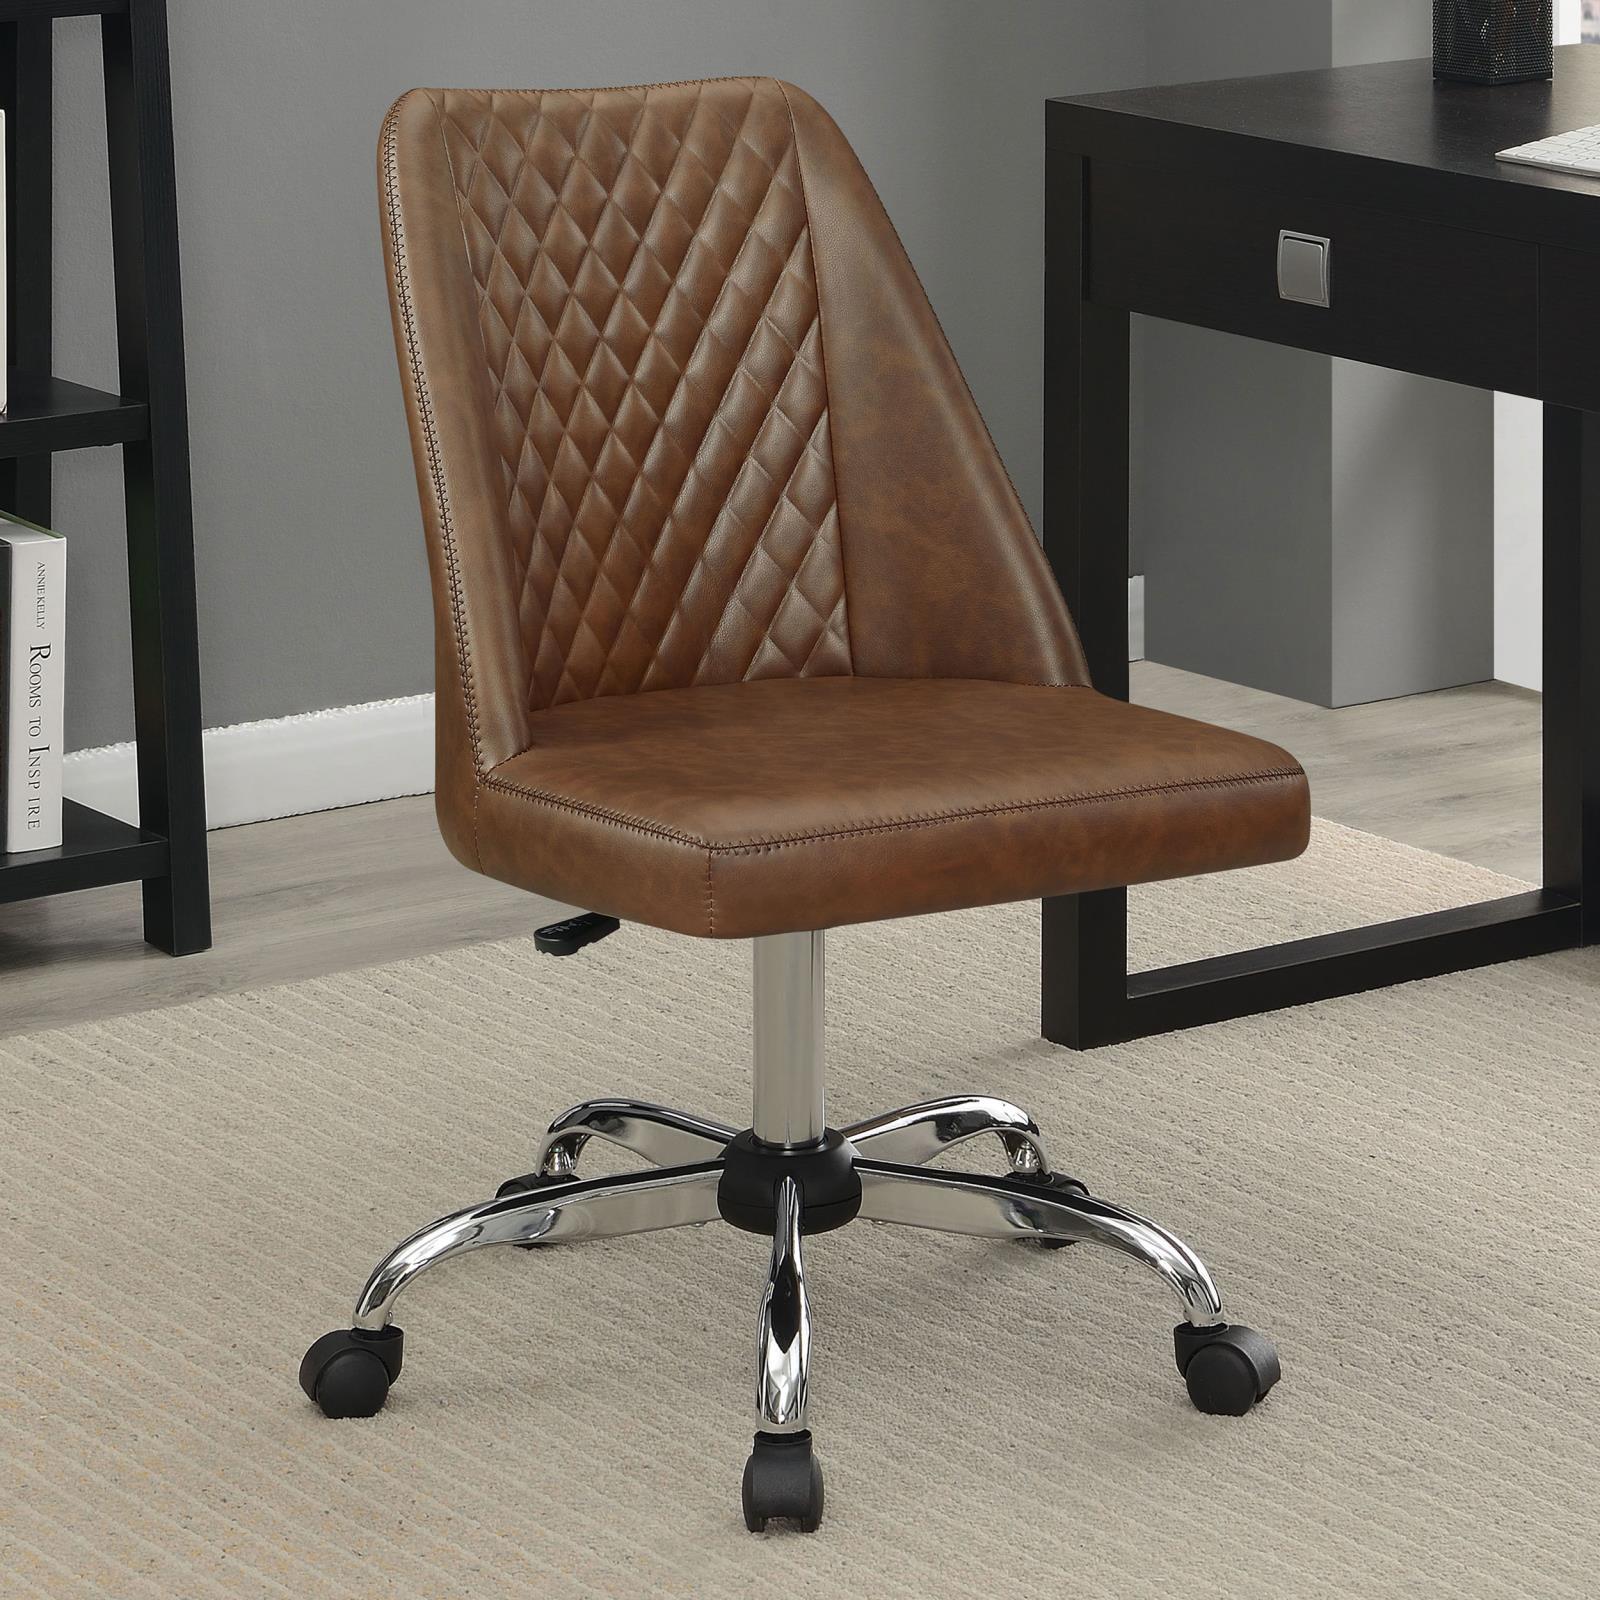 Brown Upholstered Office Chair 881197 - Ella Furniture